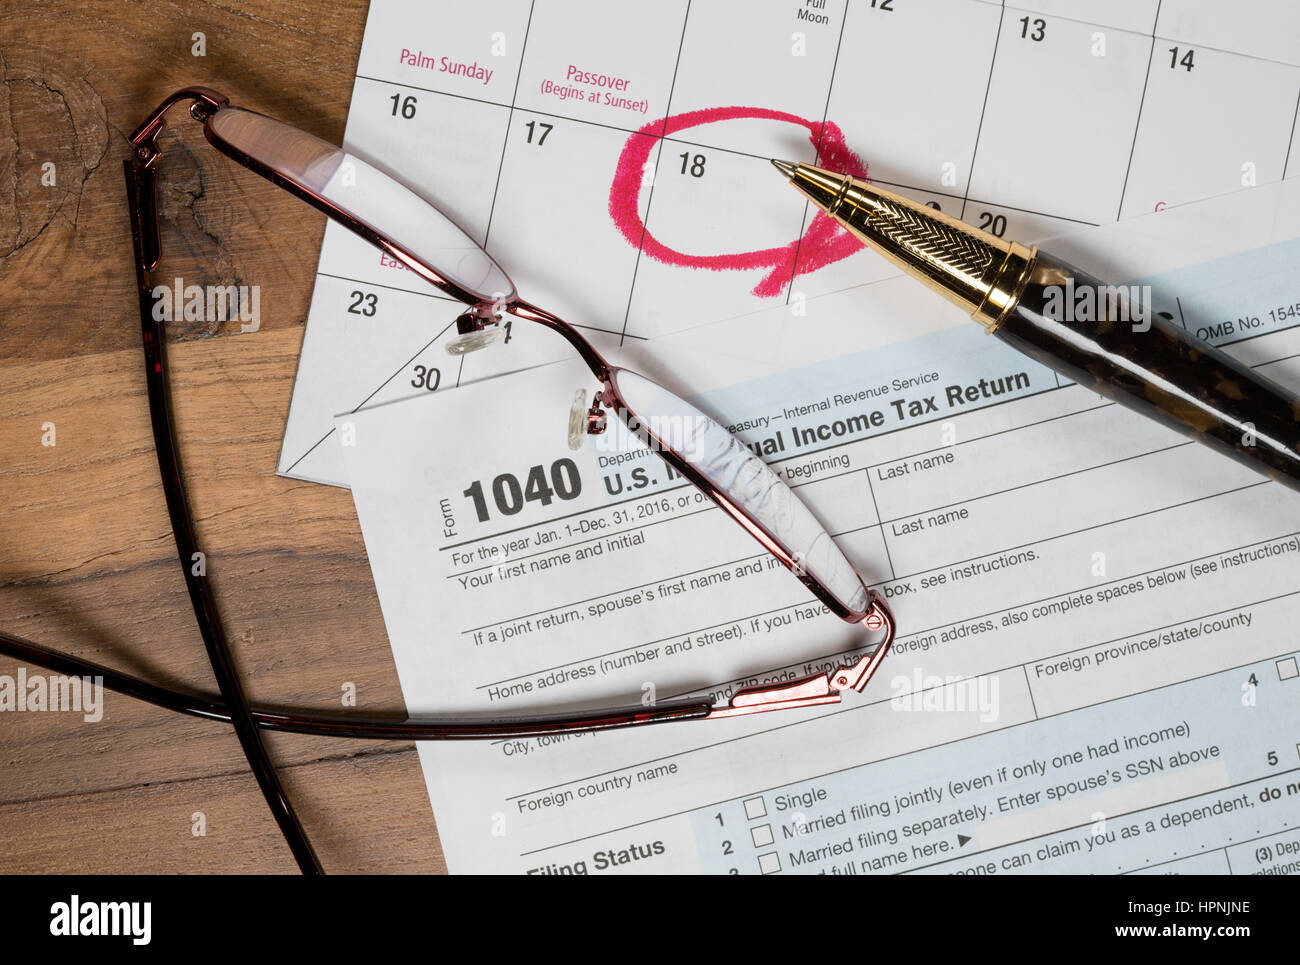 Calendar on top of form 1040 income tax form for 2016 showing tax day for filing is April 18 2017 Stock Photo